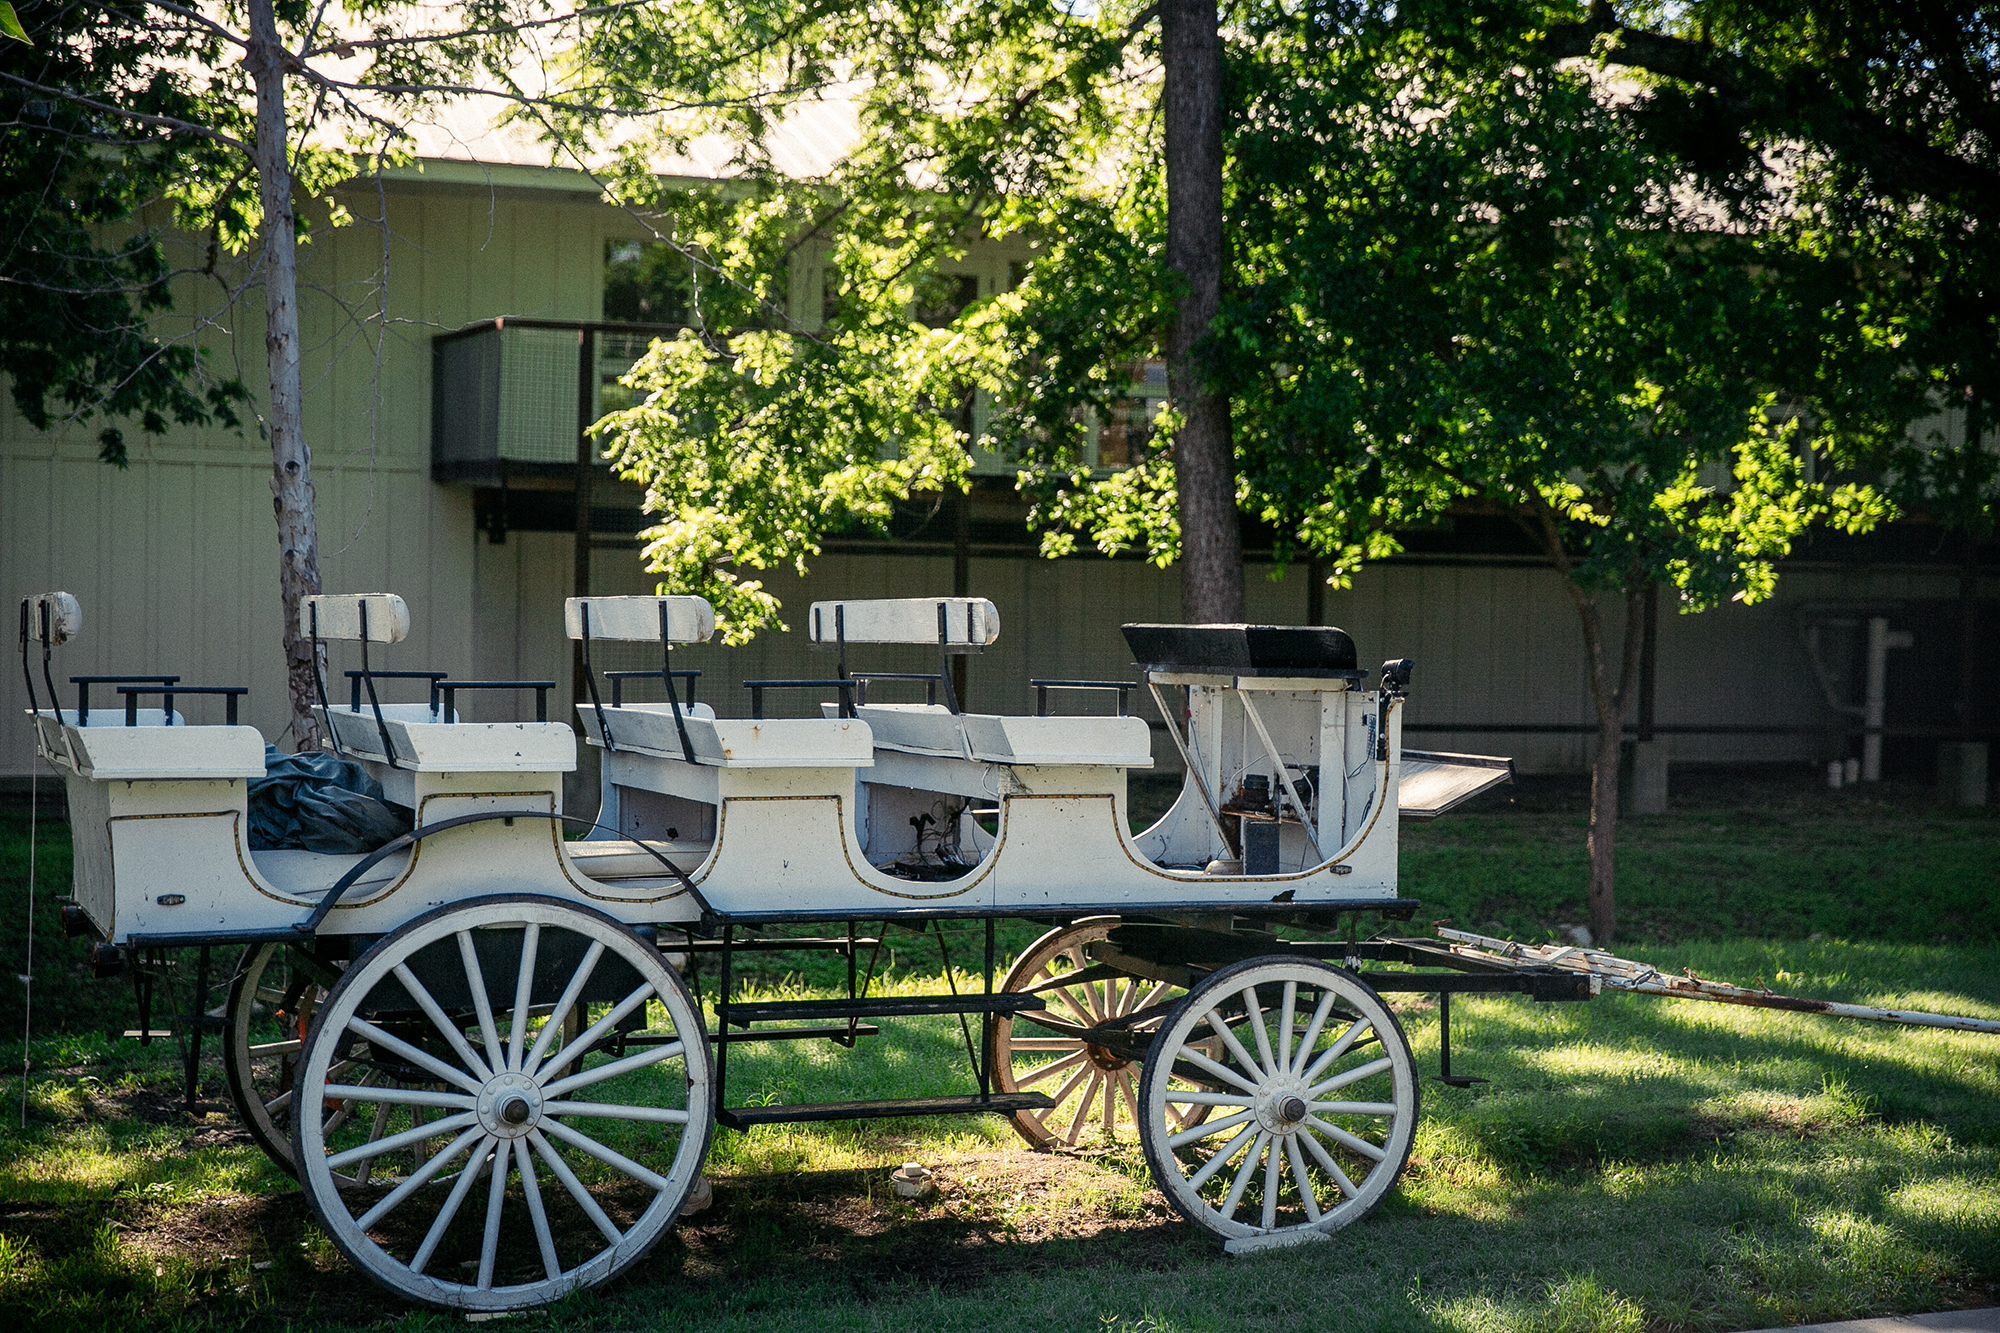 Historic white stagecoach wagon on display at the Stagecoach Inn in Salado, Texas.